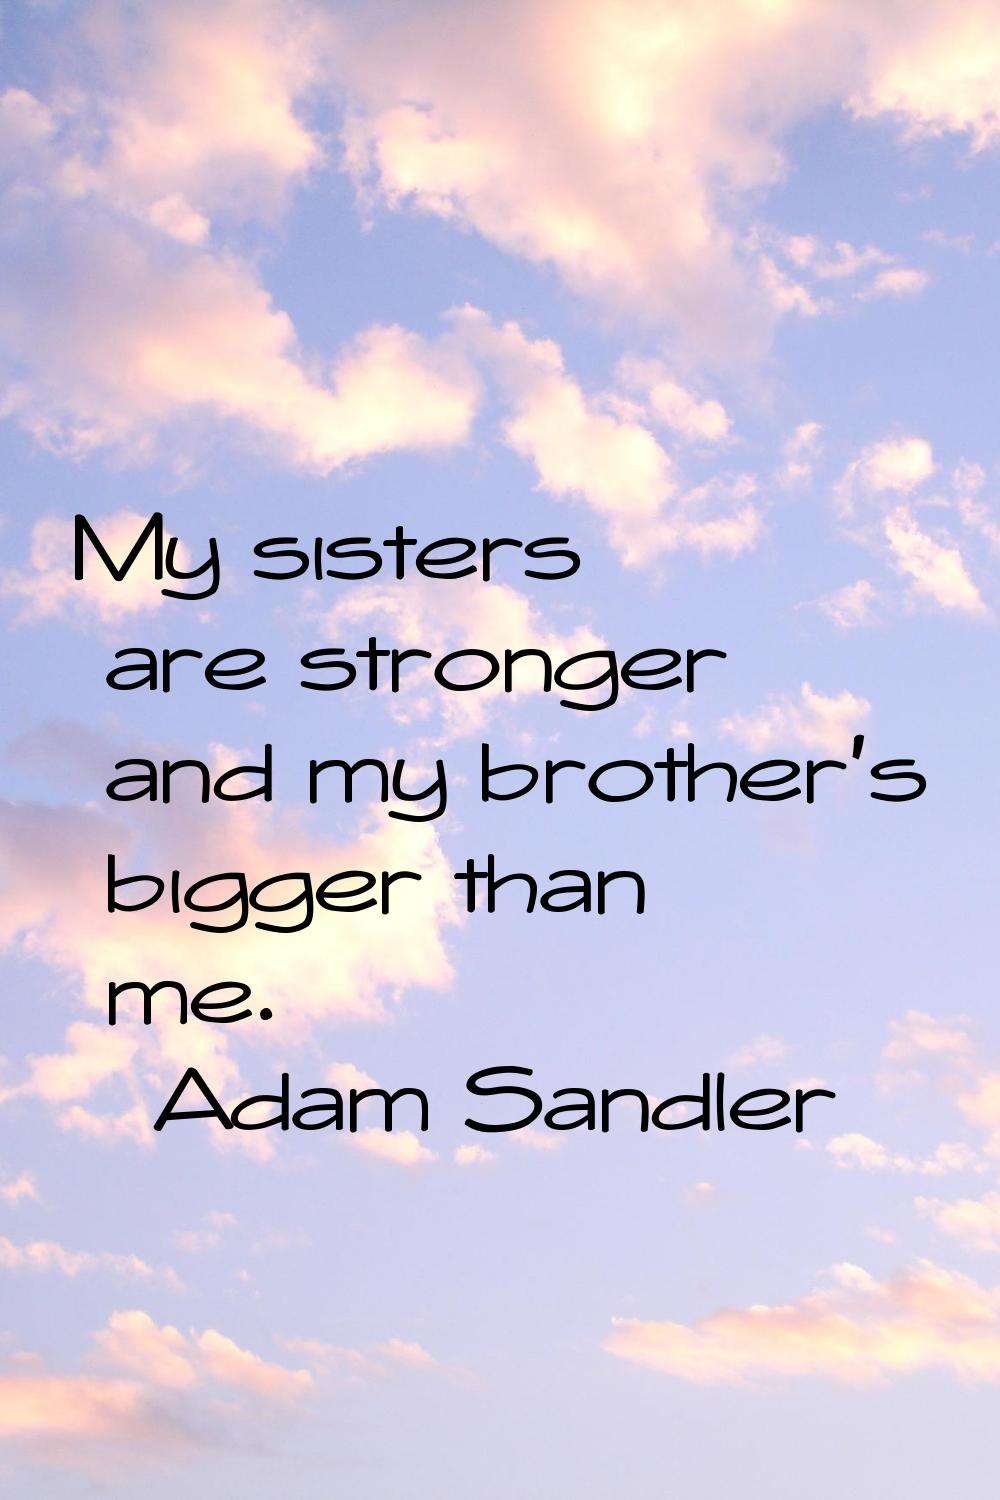 My sisters are stronger and my brother's bigger than me.